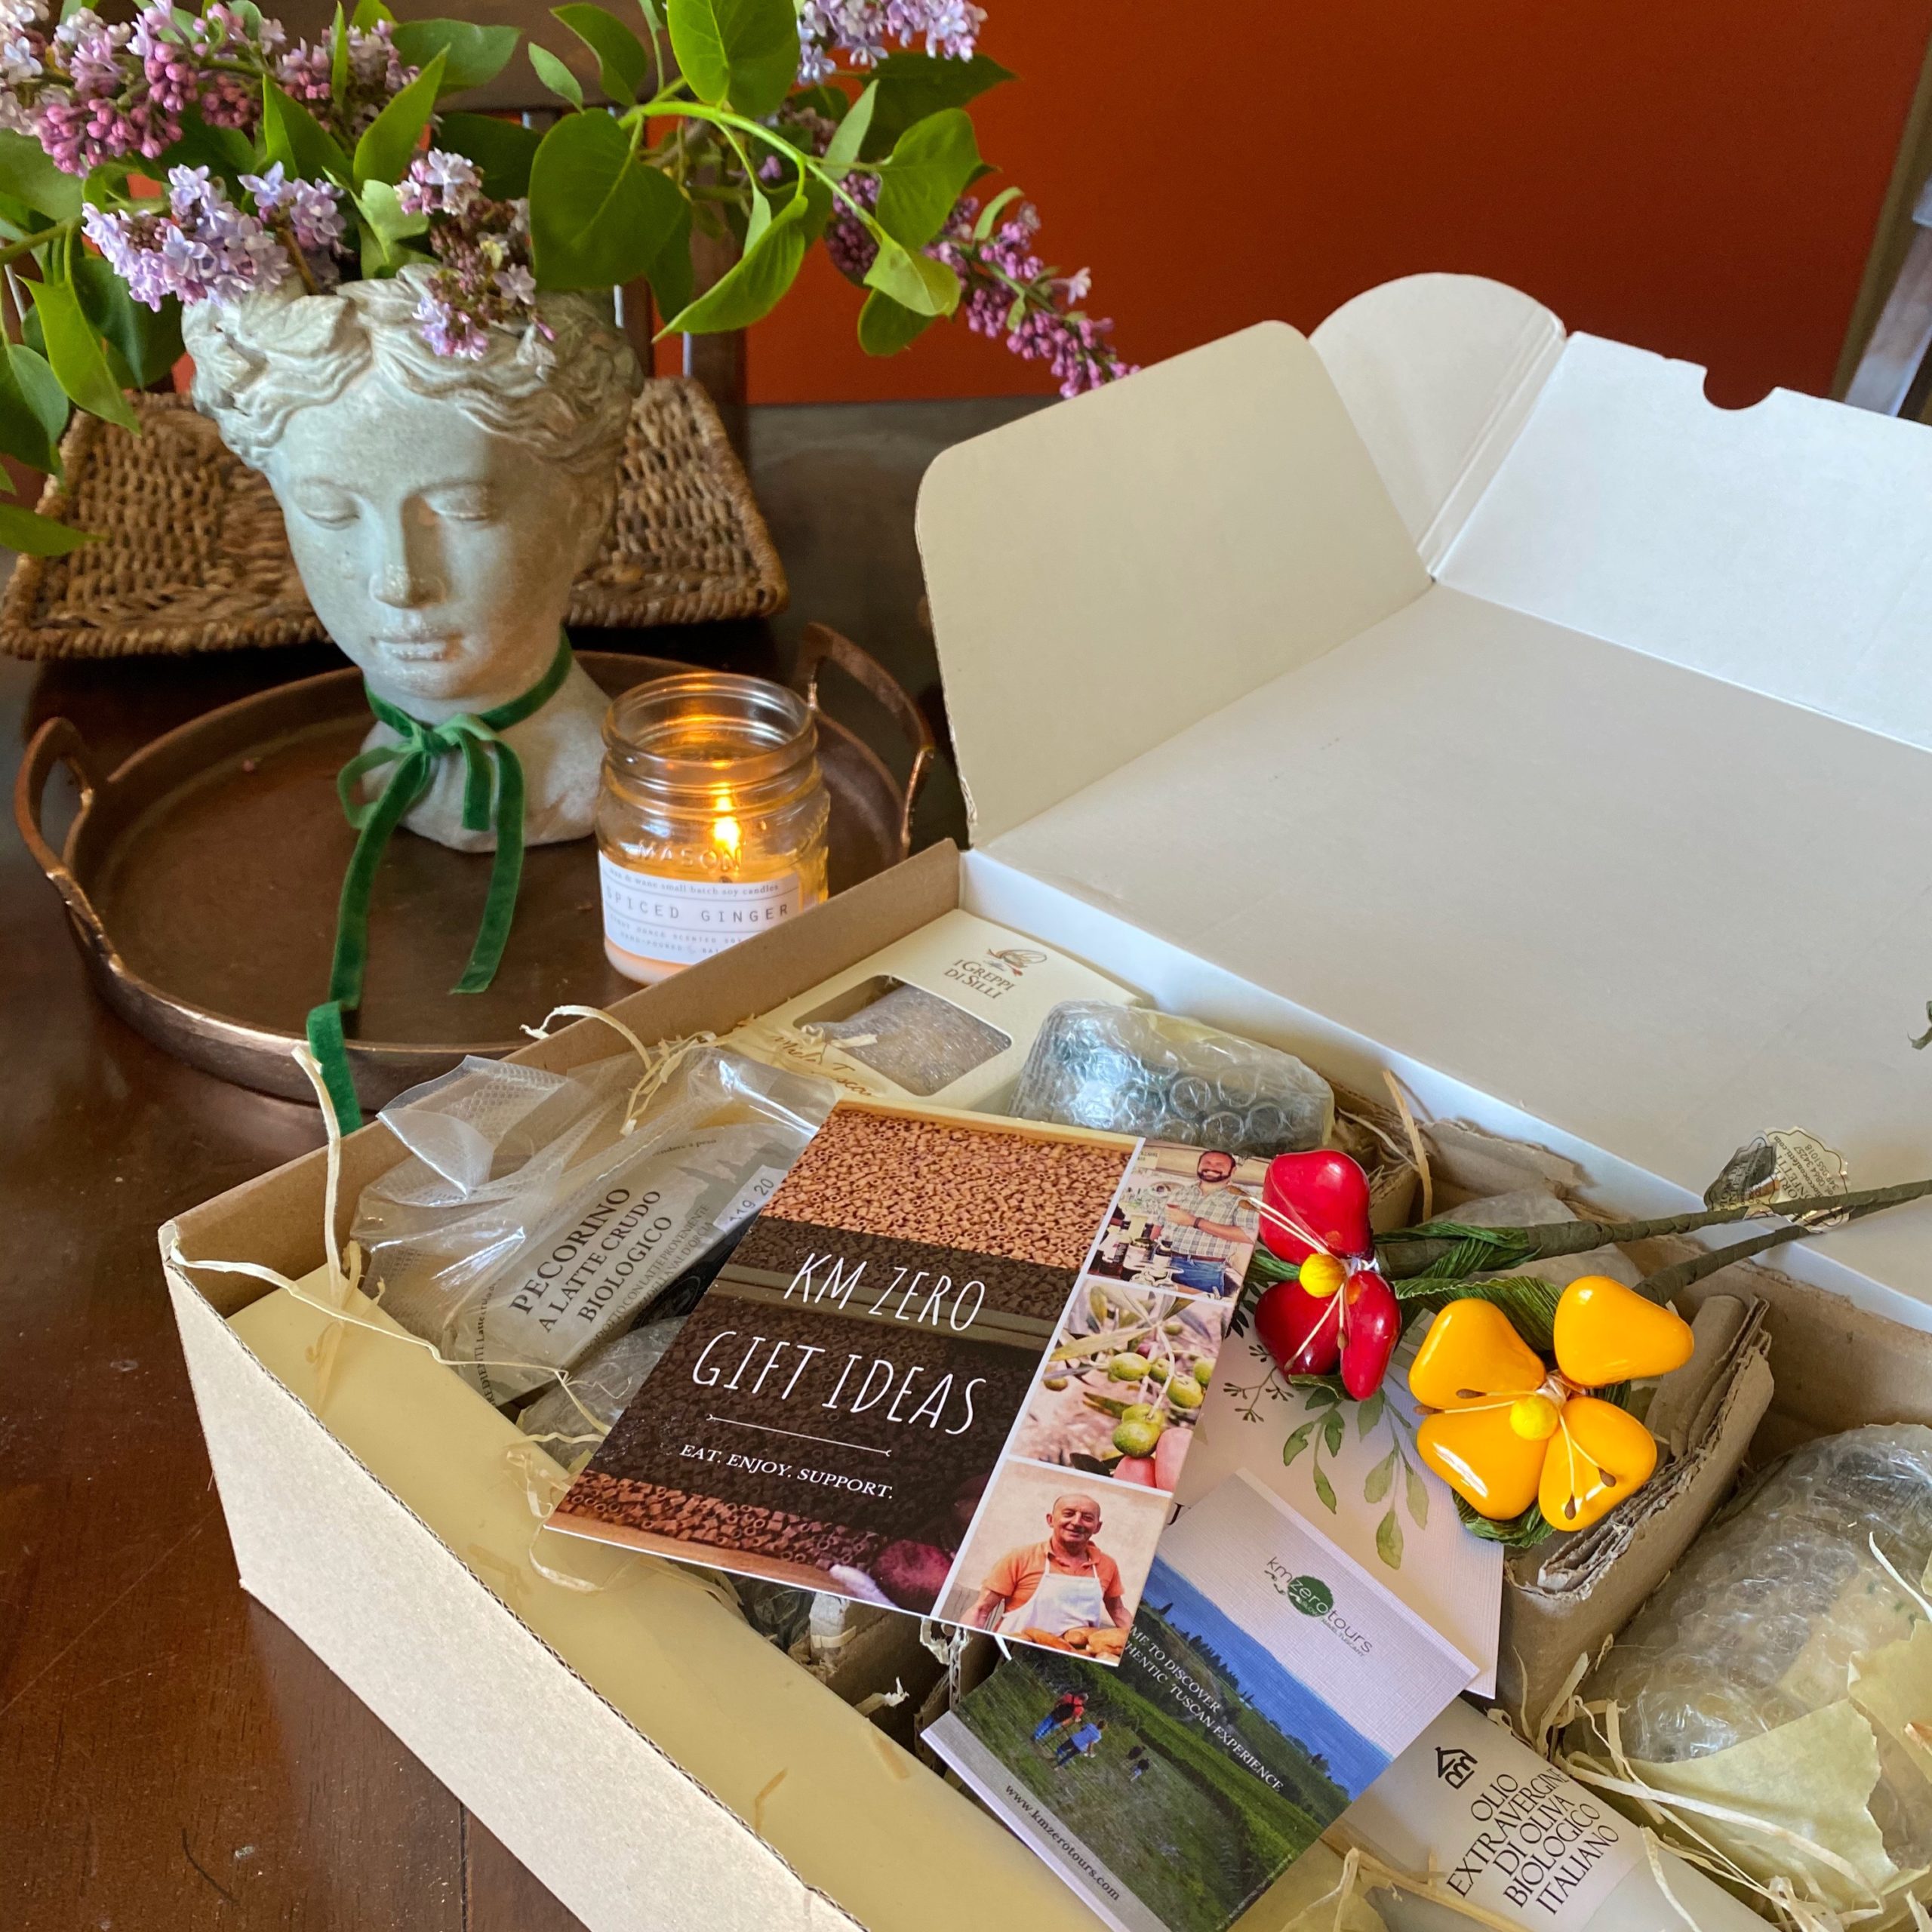 My experience: KM Zero Gourmet Gift Boxes from Tuscany 6